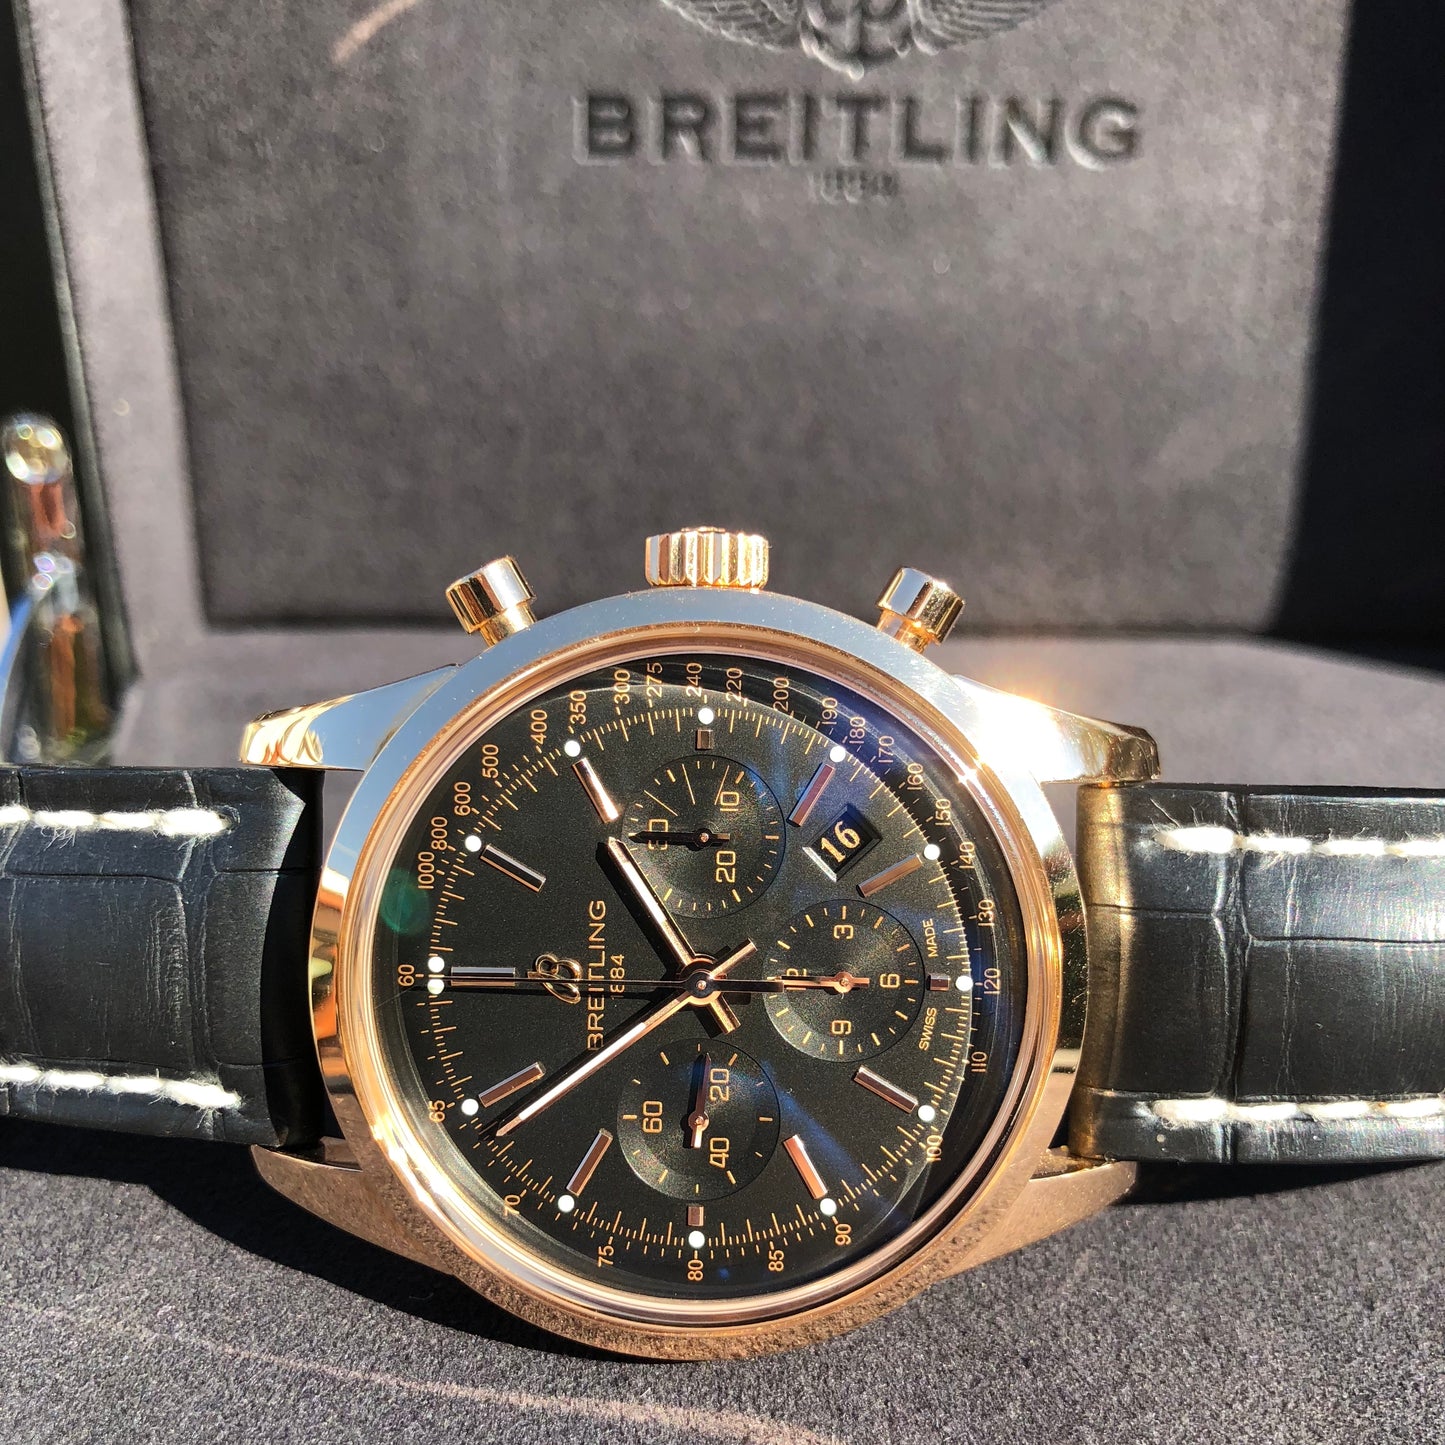 Breitling Transocean RB015212 18K Rose Gold Chronograph Black Dial Wristwatch Box Papers - Hashtag Watch Company